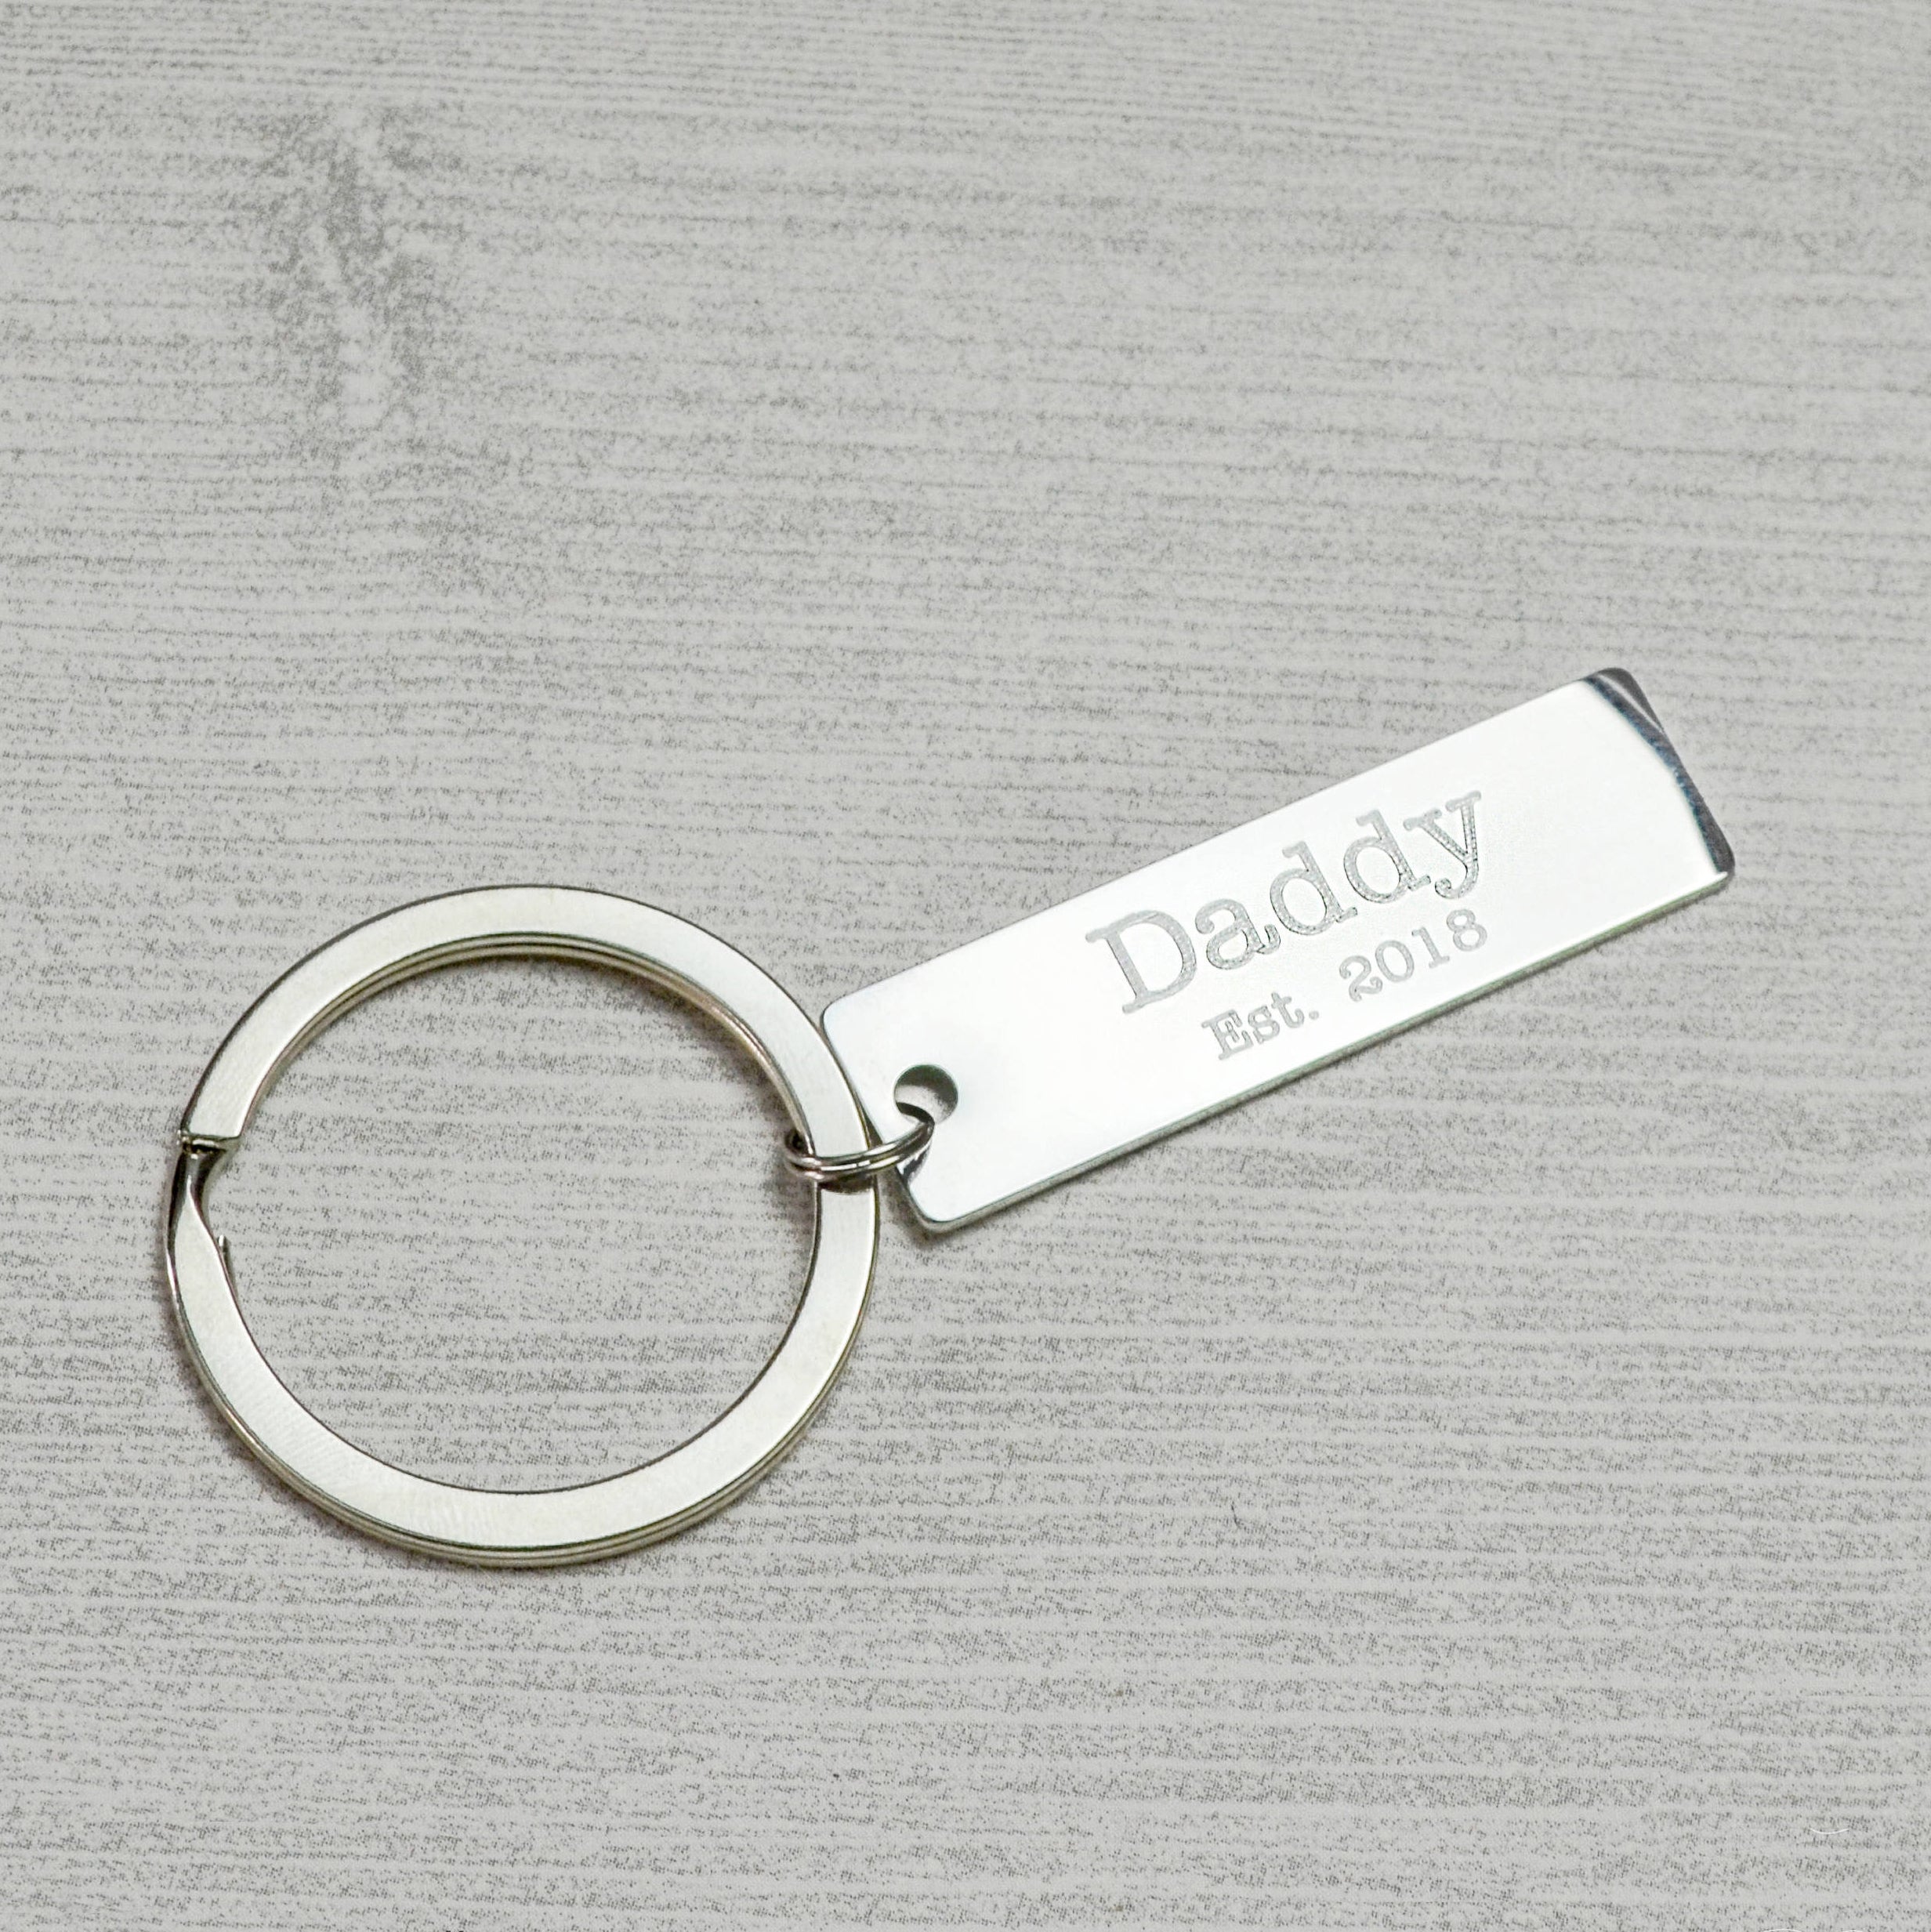 Cheap personalized silver keychains